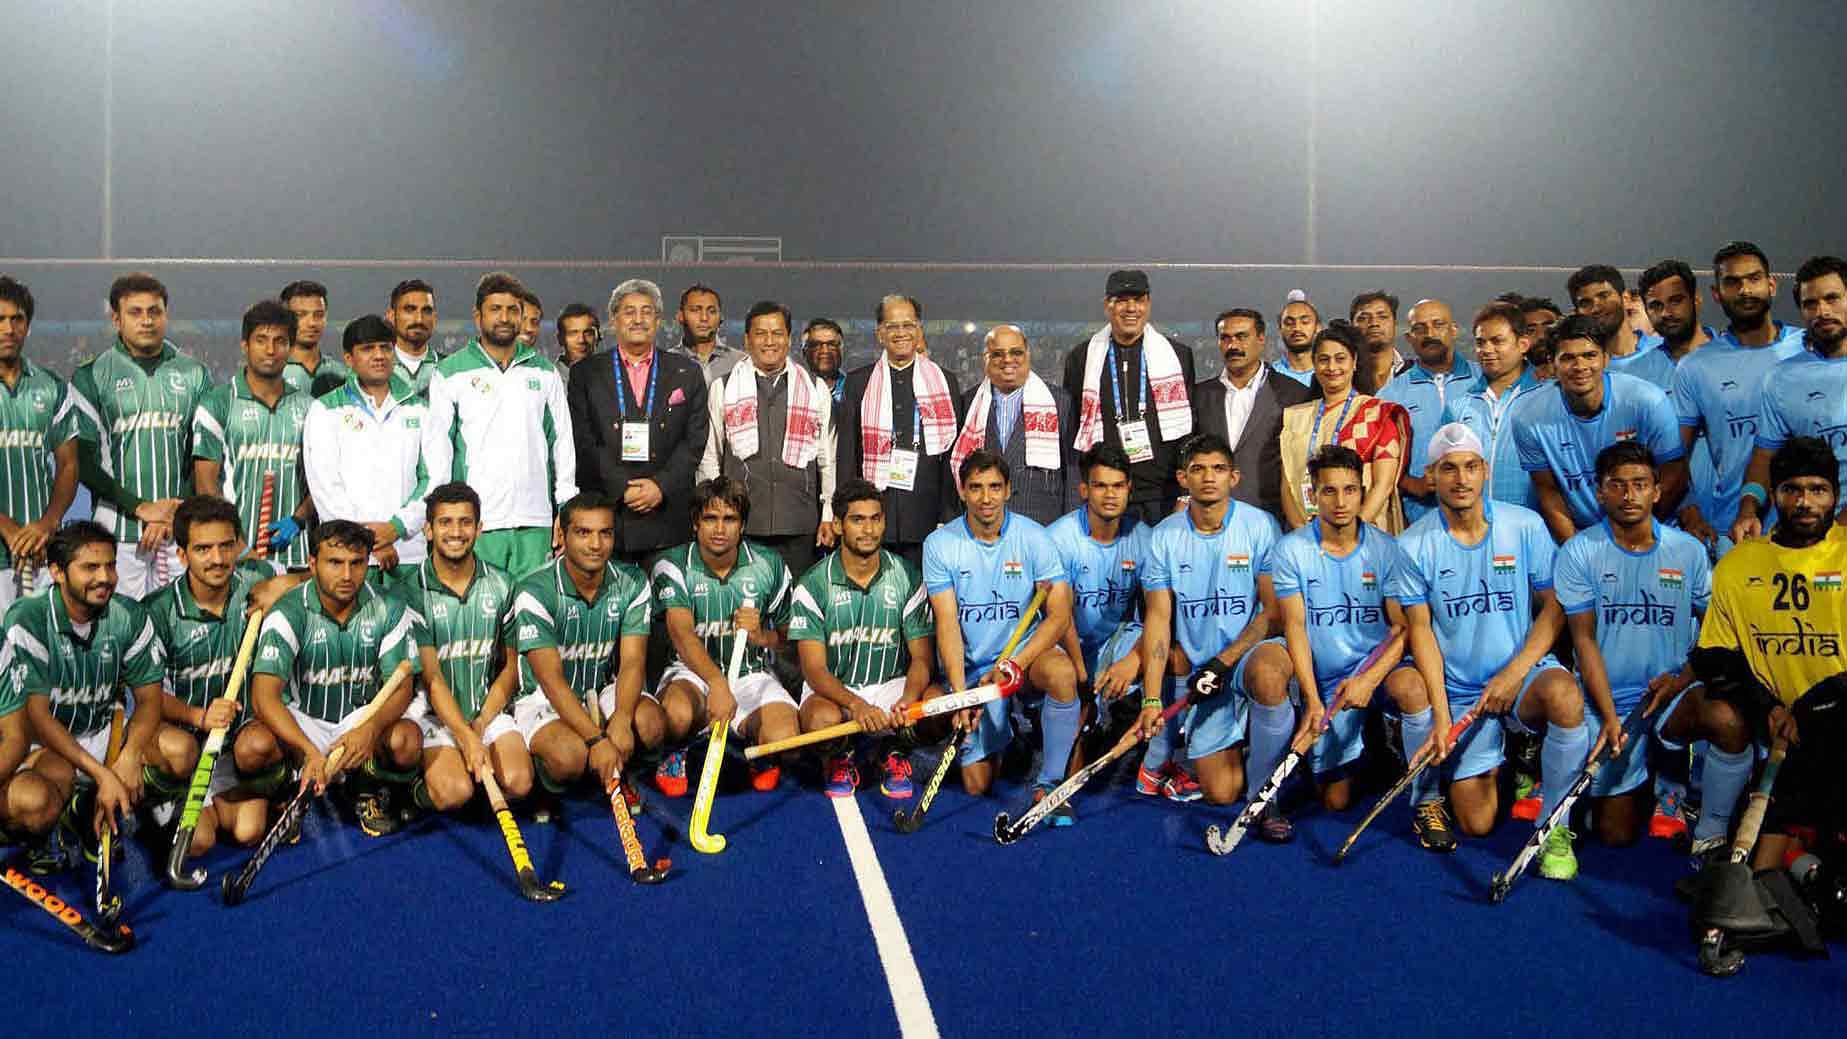 Assam Chief Minister Tarun Gogoi and Union Minister of Youth Affairs and Sports Sarbananda Sonowal pose for a group photo before the hockey match between India and Pakistan at the South Asian Games. (Photo: PTI)